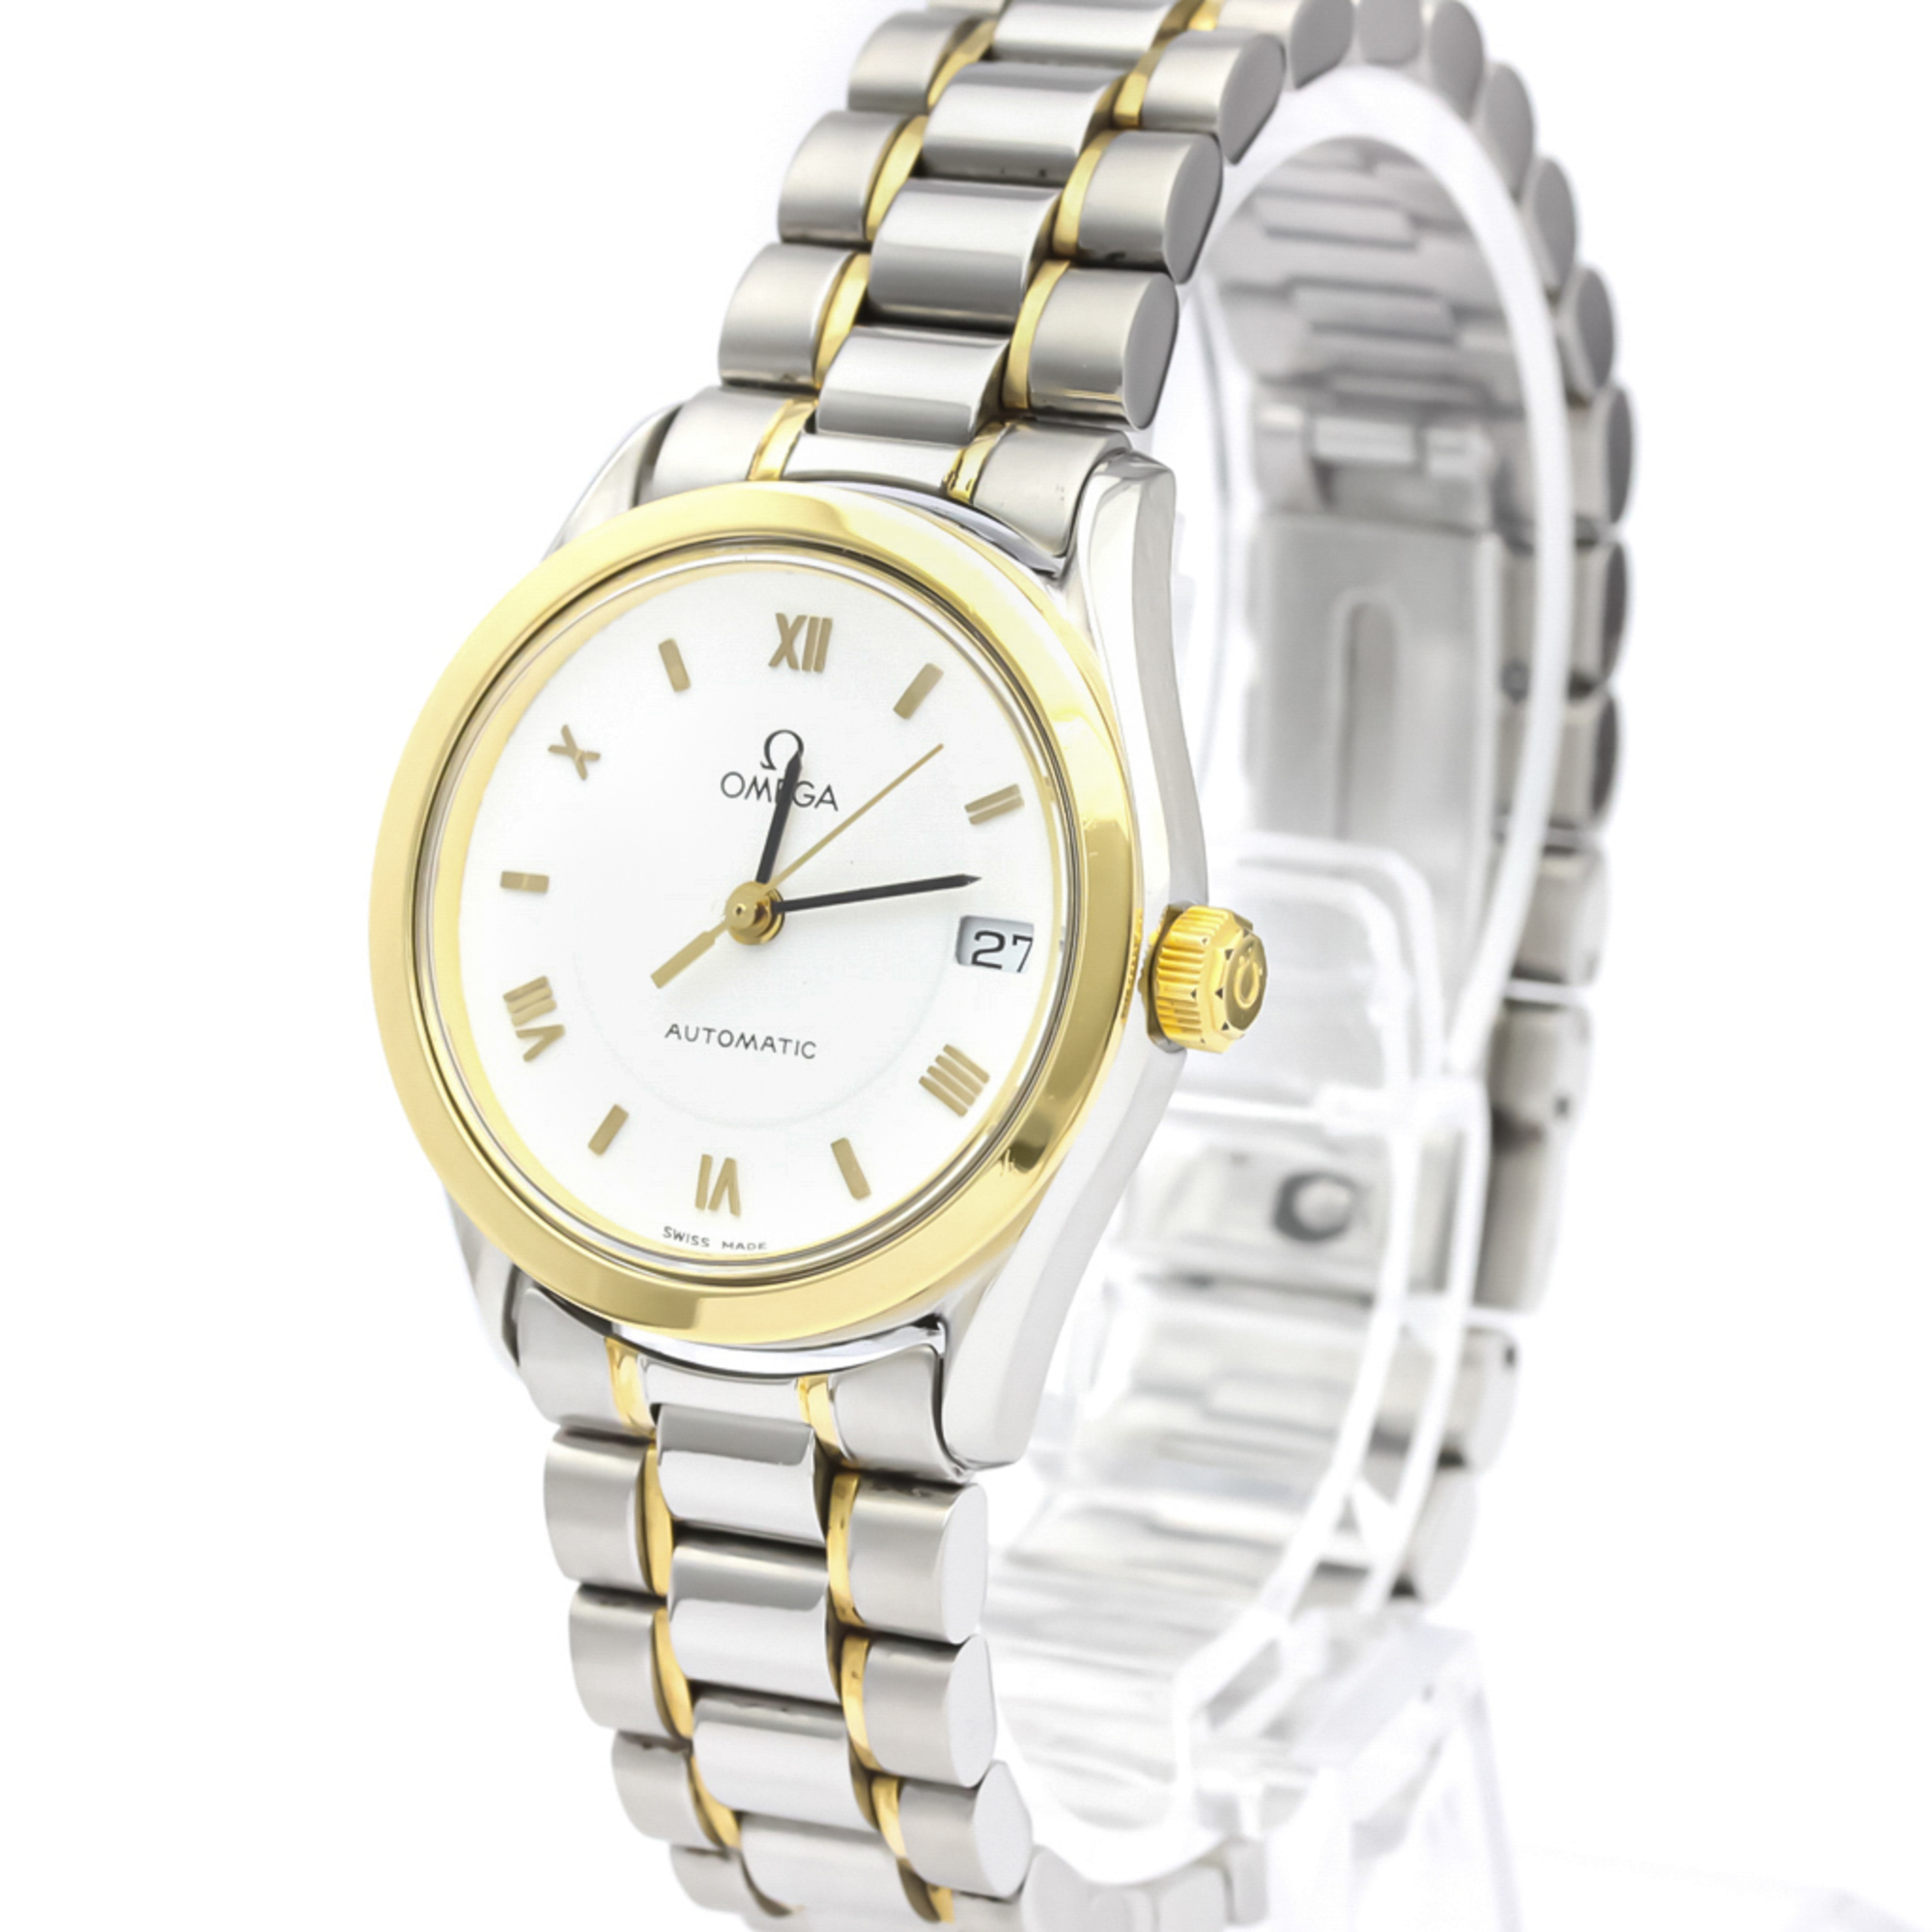 Omega Classic Automatic Yellow Gold (18K),Stainless Steel Women's Dress Watch 566.0285